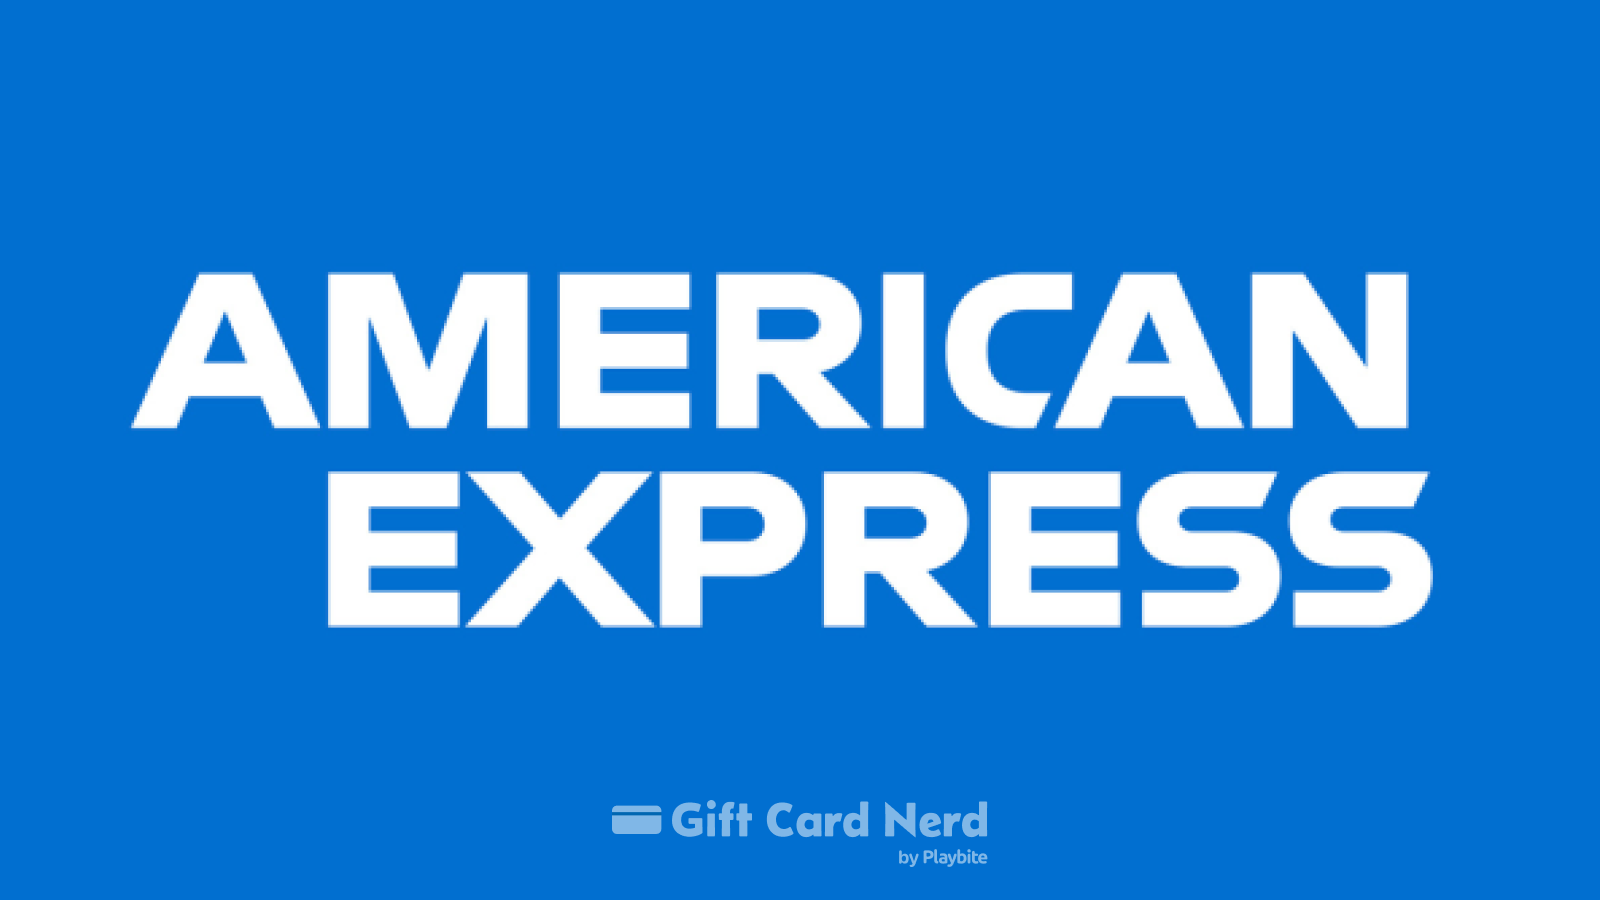 Can I Use an Amex Gift Card on Postmates?